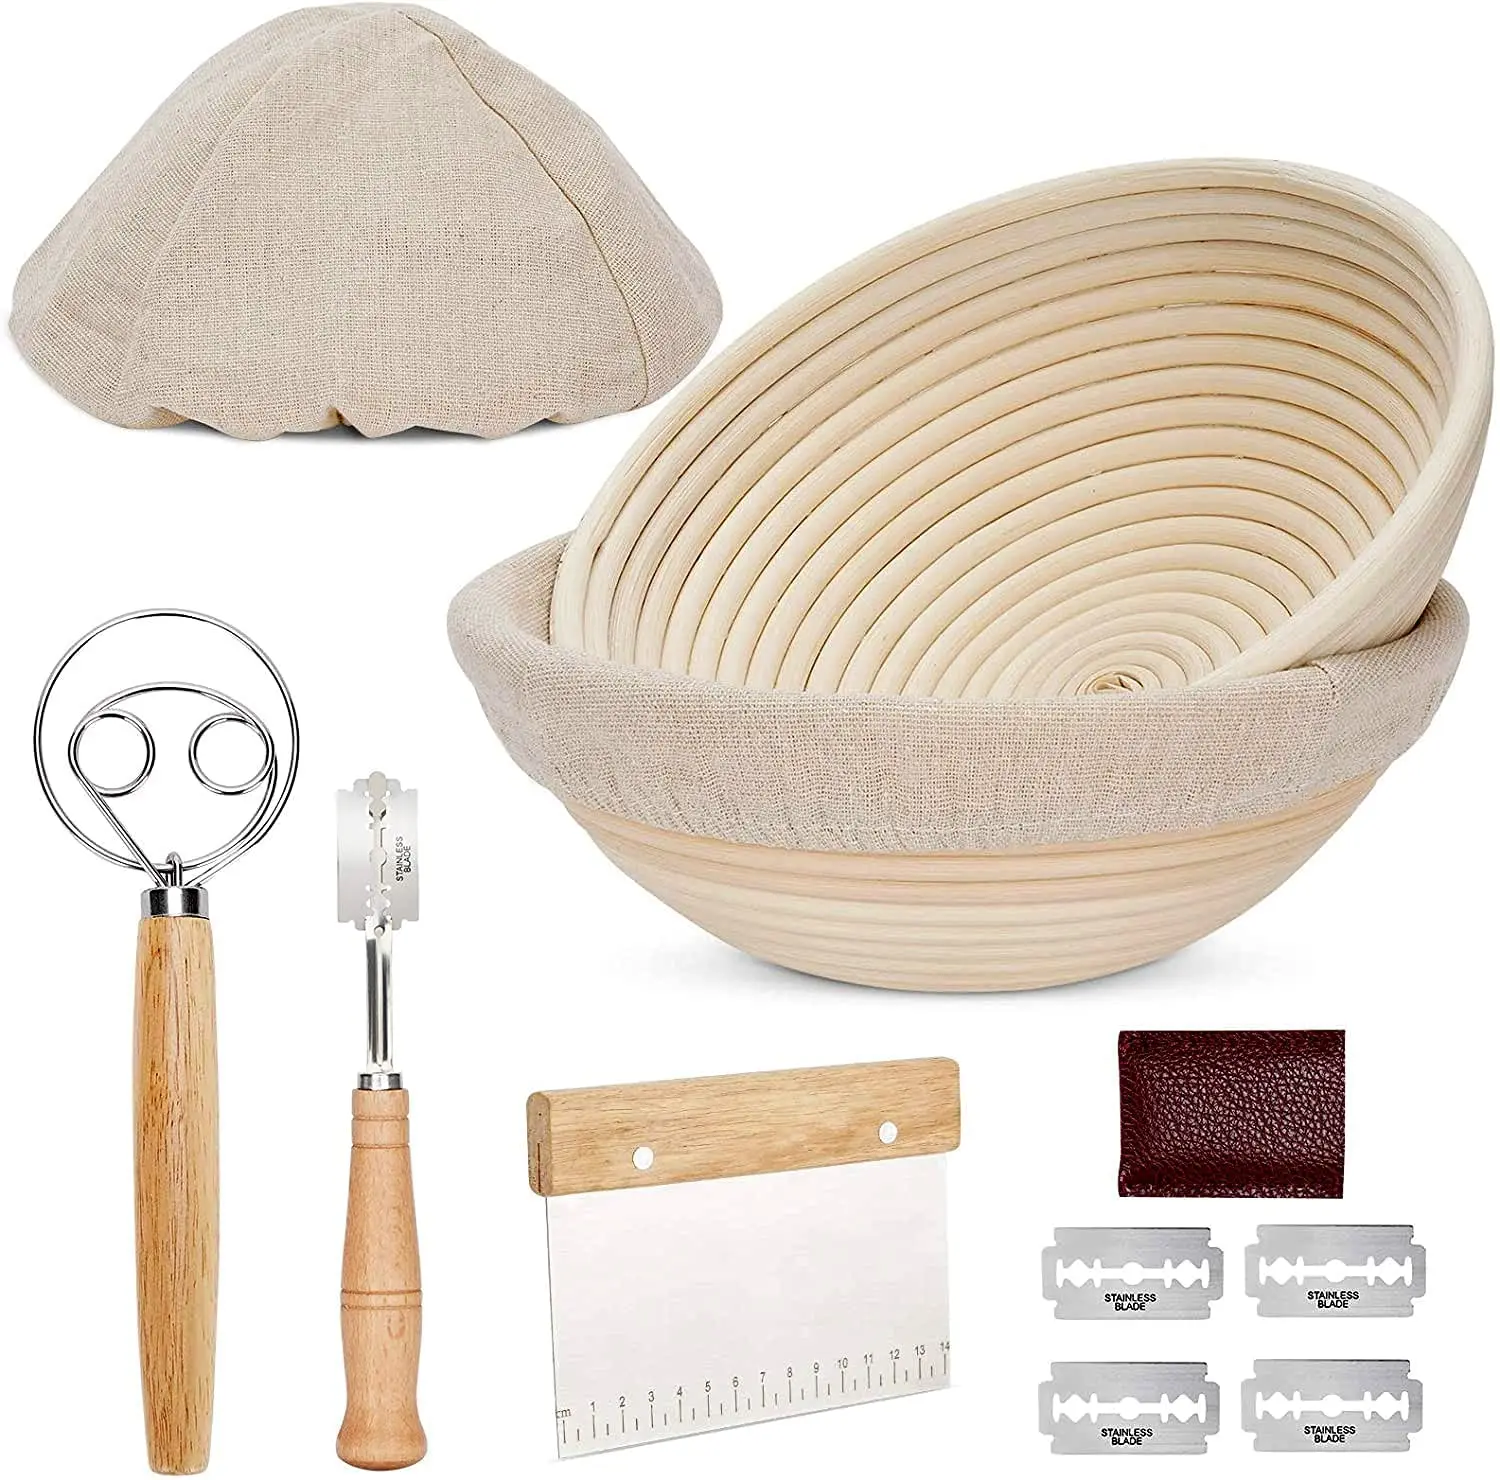 Bread Proofing Basket  Set 10 Inch For Baking With Liner+Lame Premium Bake 